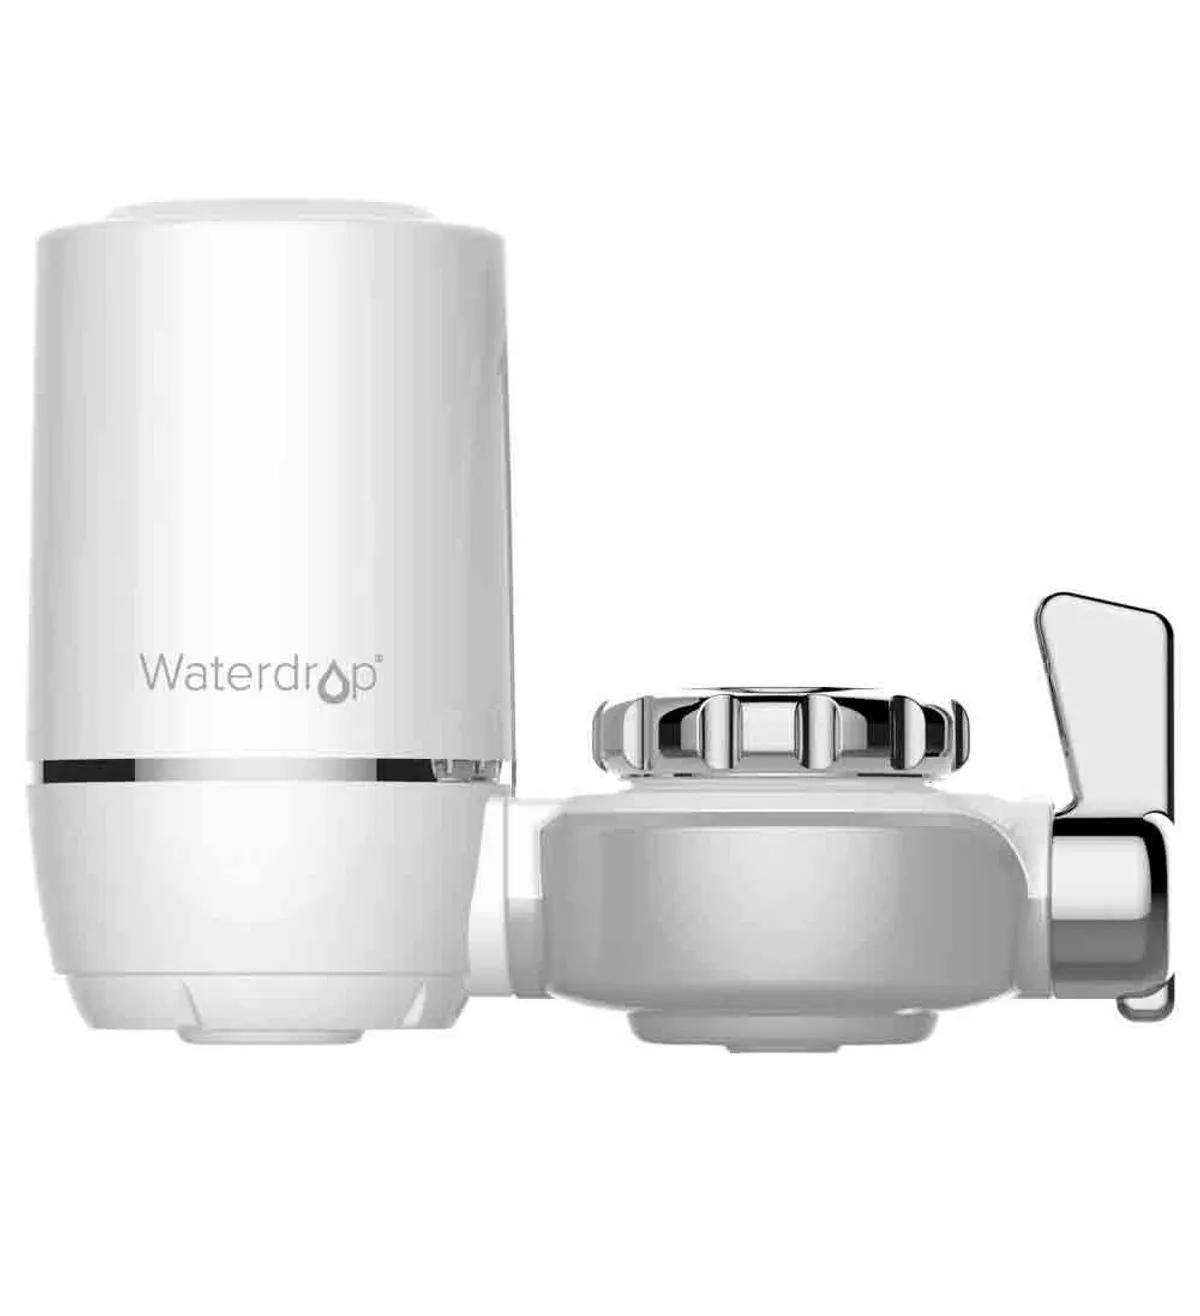 Waterdrop 320 Gallon Long Lasting Water Faucet Filtration Review